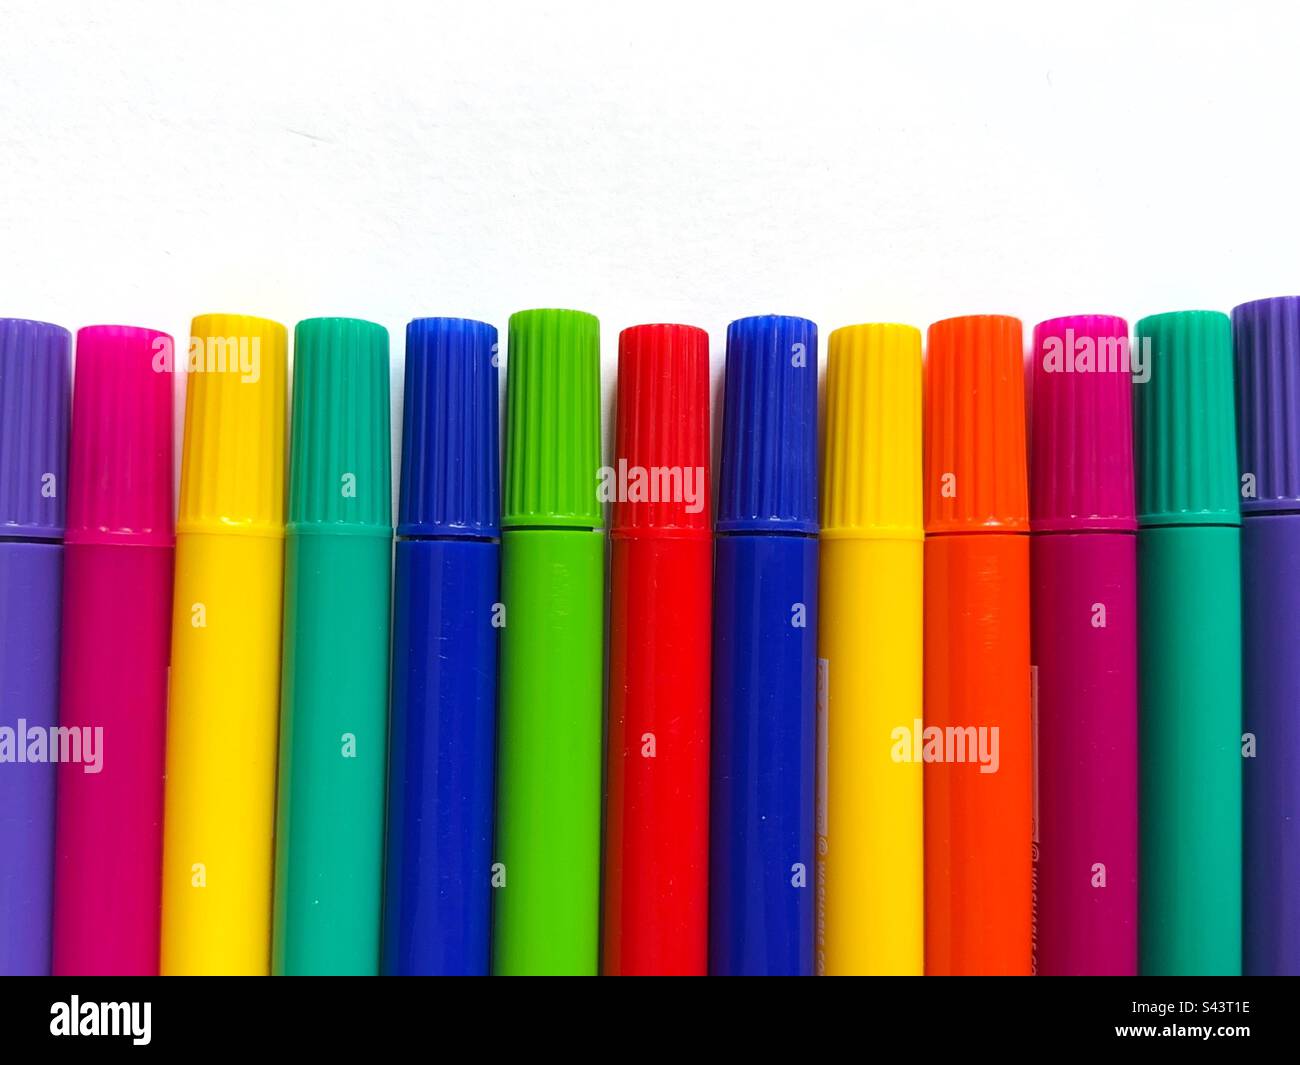 Row of coloured marker pens against a plain white background. Copy space. No people. Stock Photo